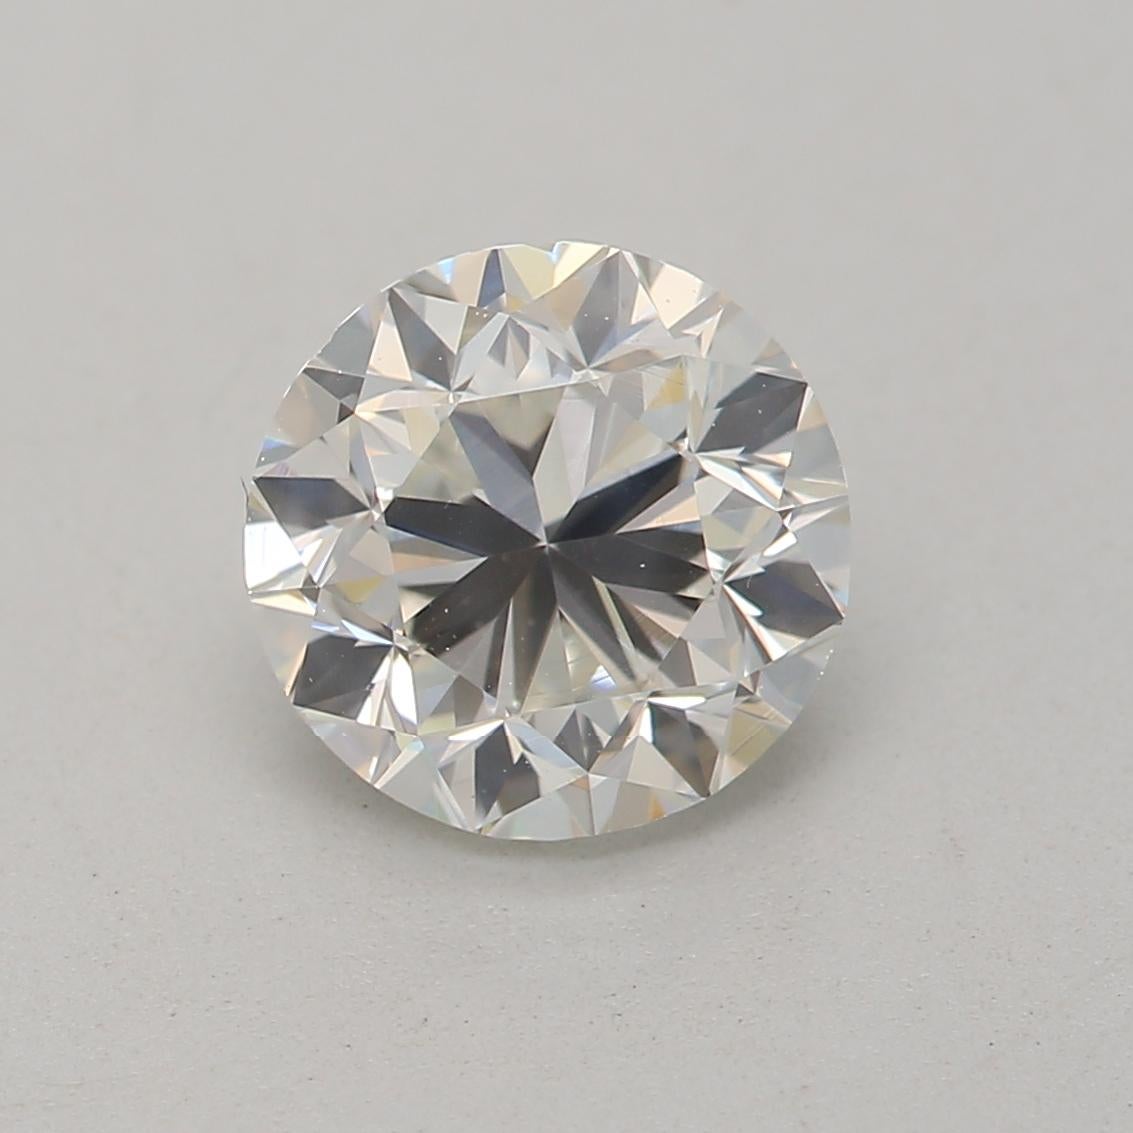 *100% NATURAL FANCY COLOUR DIAMOND*

✪ Diamond Details ✪

➛ Shape: Round
➛ Colour Grade: H
➛ Carat: 1.00
➛ Clarity: VS2
➛ GIA Certified 

^FEATURES OF THE DIAMOND^

Our 1-carat diamond is a diamond that weighs approximately 200 milligrams. The carat